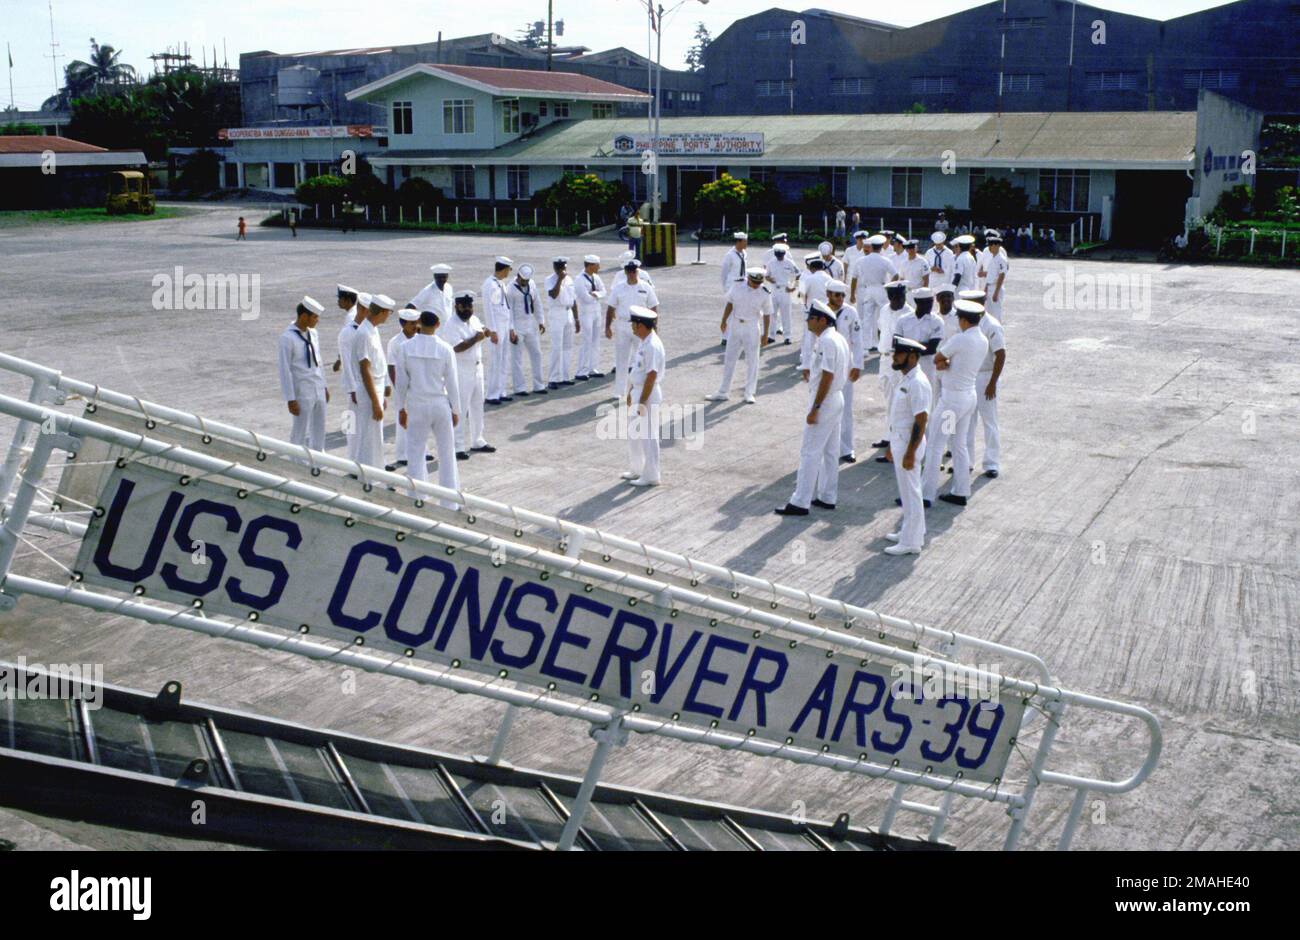 Crewmen from the salvage ship USS CONSERVER (ARS-39) stand on the pier next to their ship and prepare to march in a civil-military parade commemorating GEN Douglas MacArthur's return here 37 years ago. MacArthur's return fulfilled his earlier and oft-quoted promise of I shall return. Base: Leyte Island Country: Philippines (PHL) Stock Photo